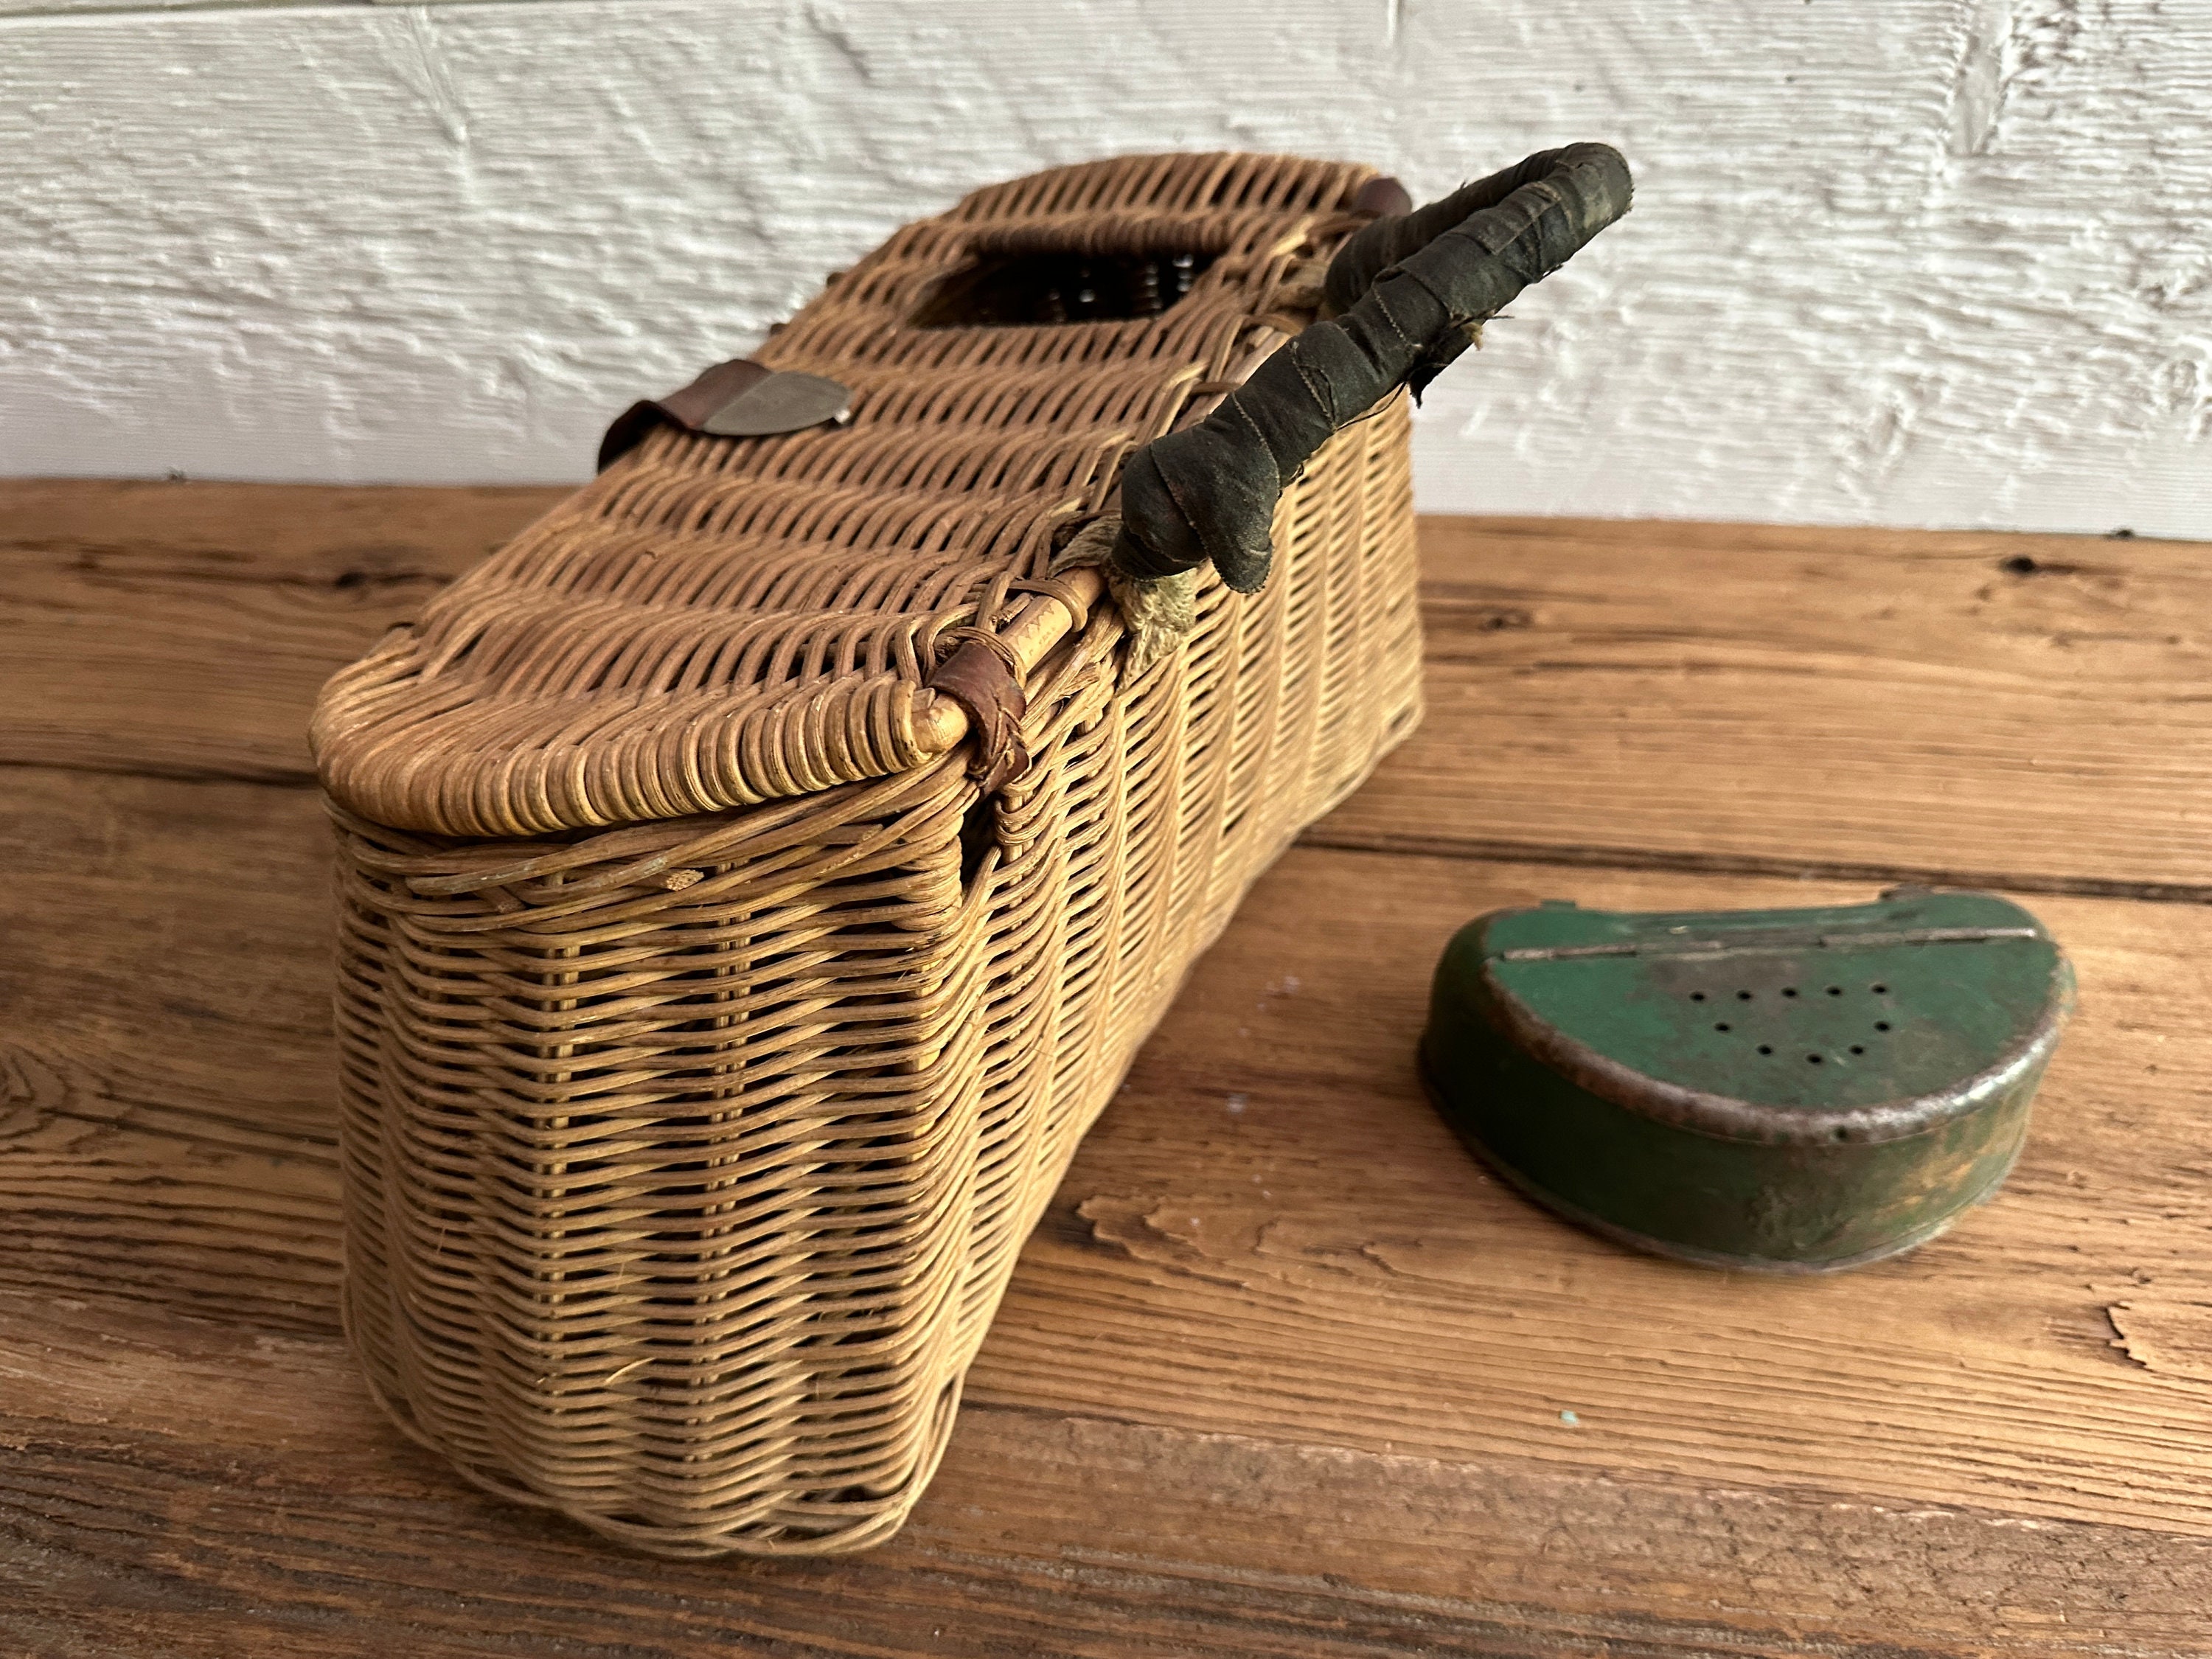 Smaller Size Vintage Fly Fishermans Hand Woven Fly Fishing Creel Basket